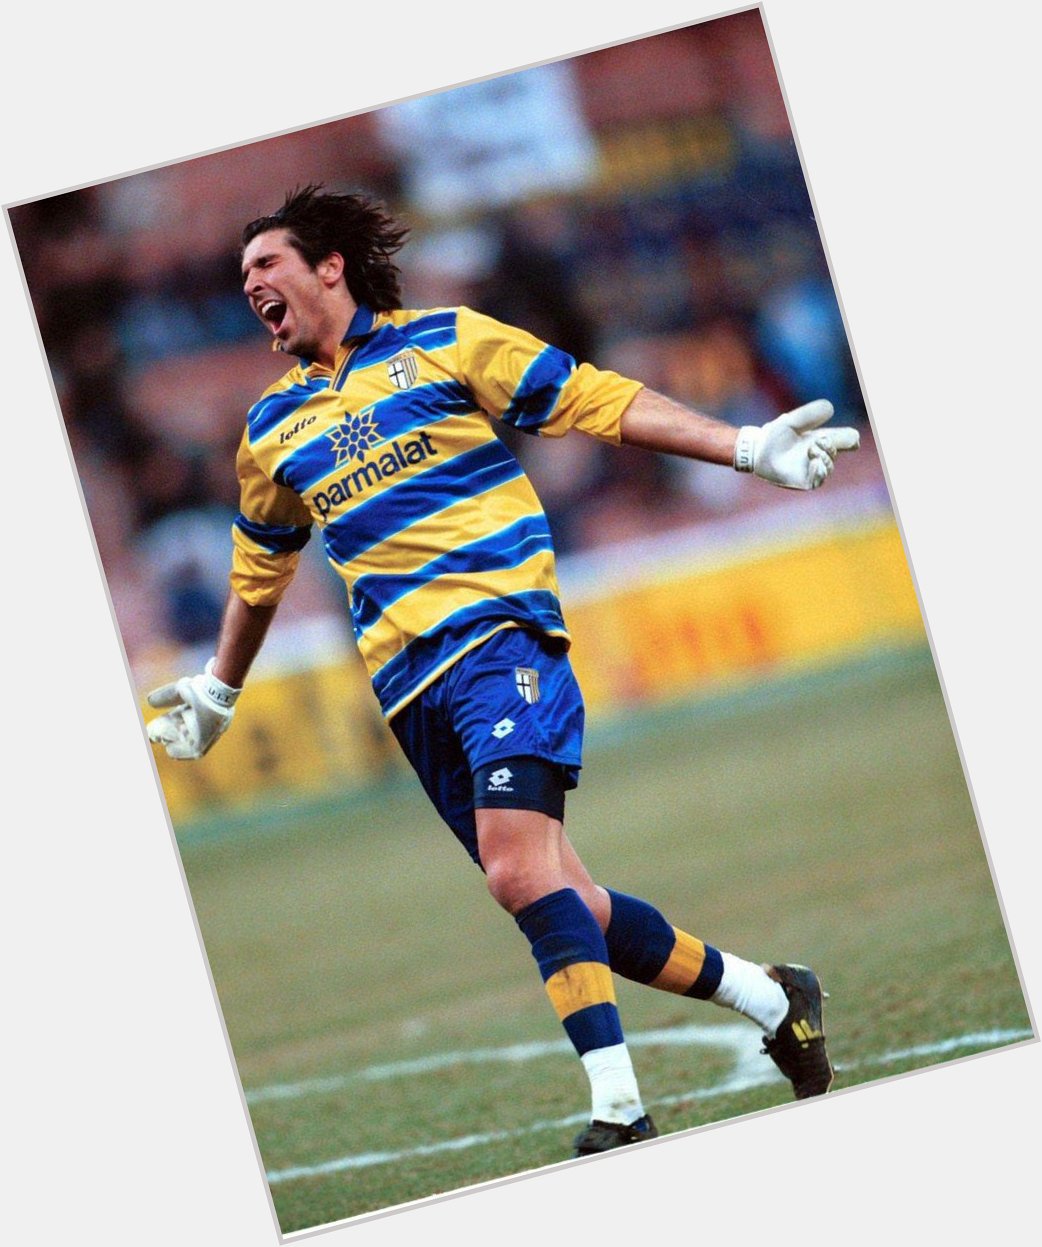 Happy birthday to Gianluigi Buffon, 45 years young today and still having a go for Parma.

Fair play. 